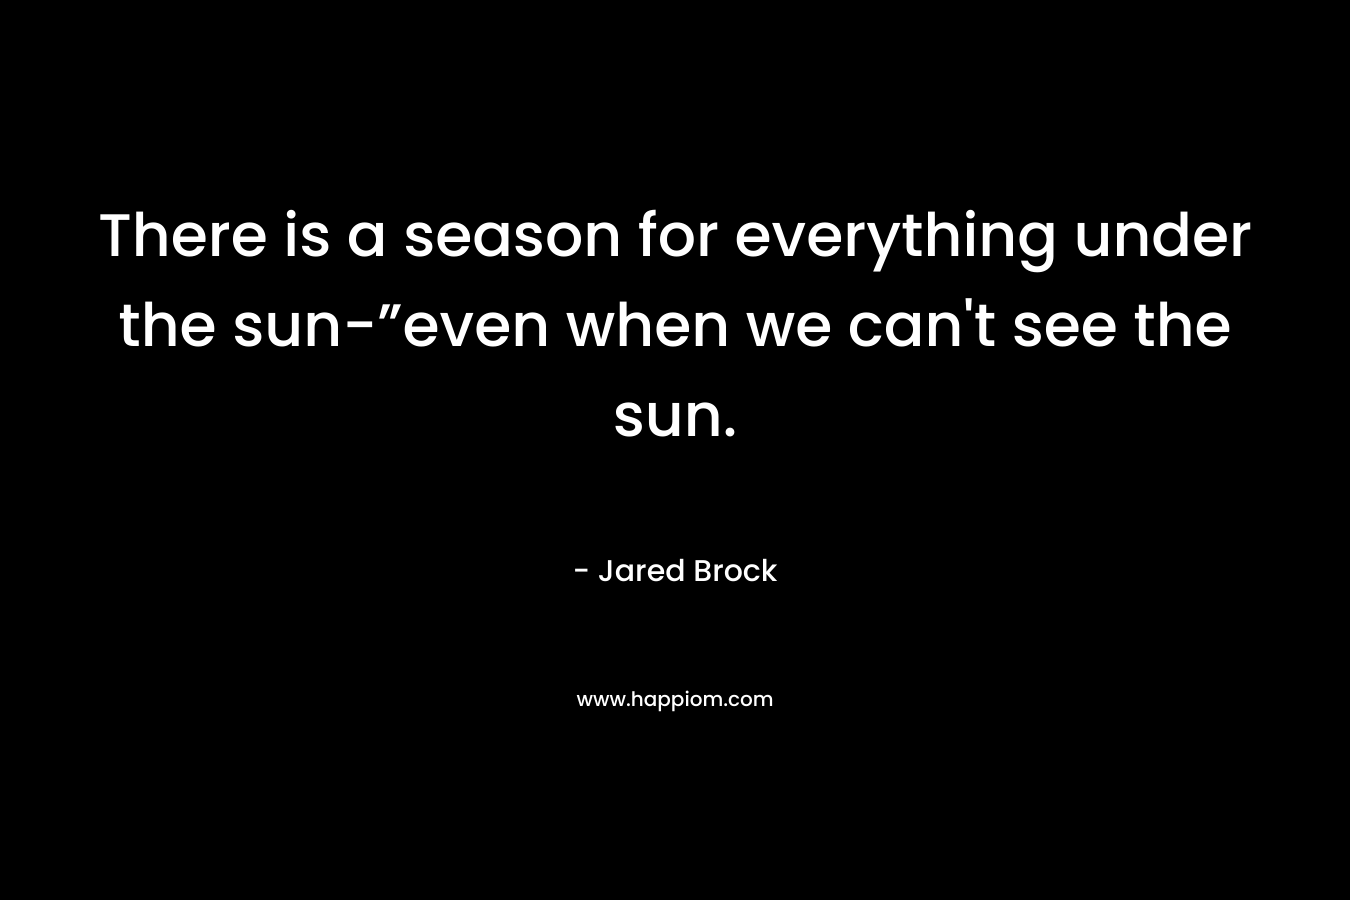 There is a season for everything under the sun-”even when we can't see the sun.